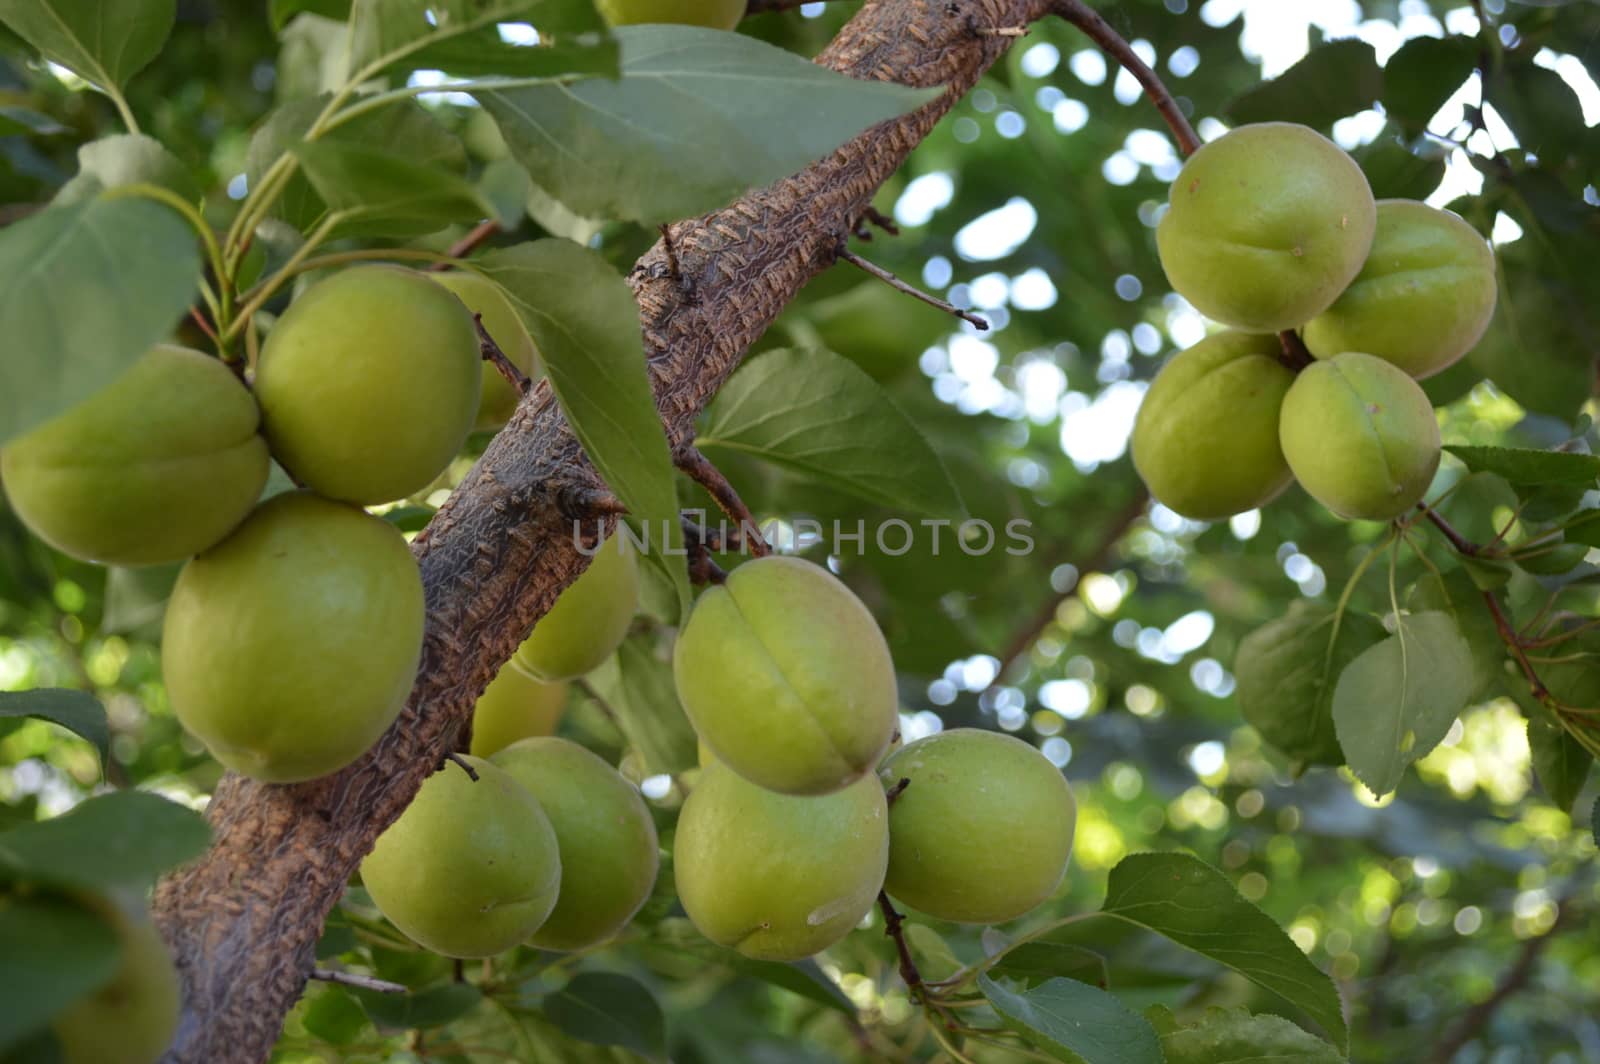 Apricot fruits ripening on a trees branch